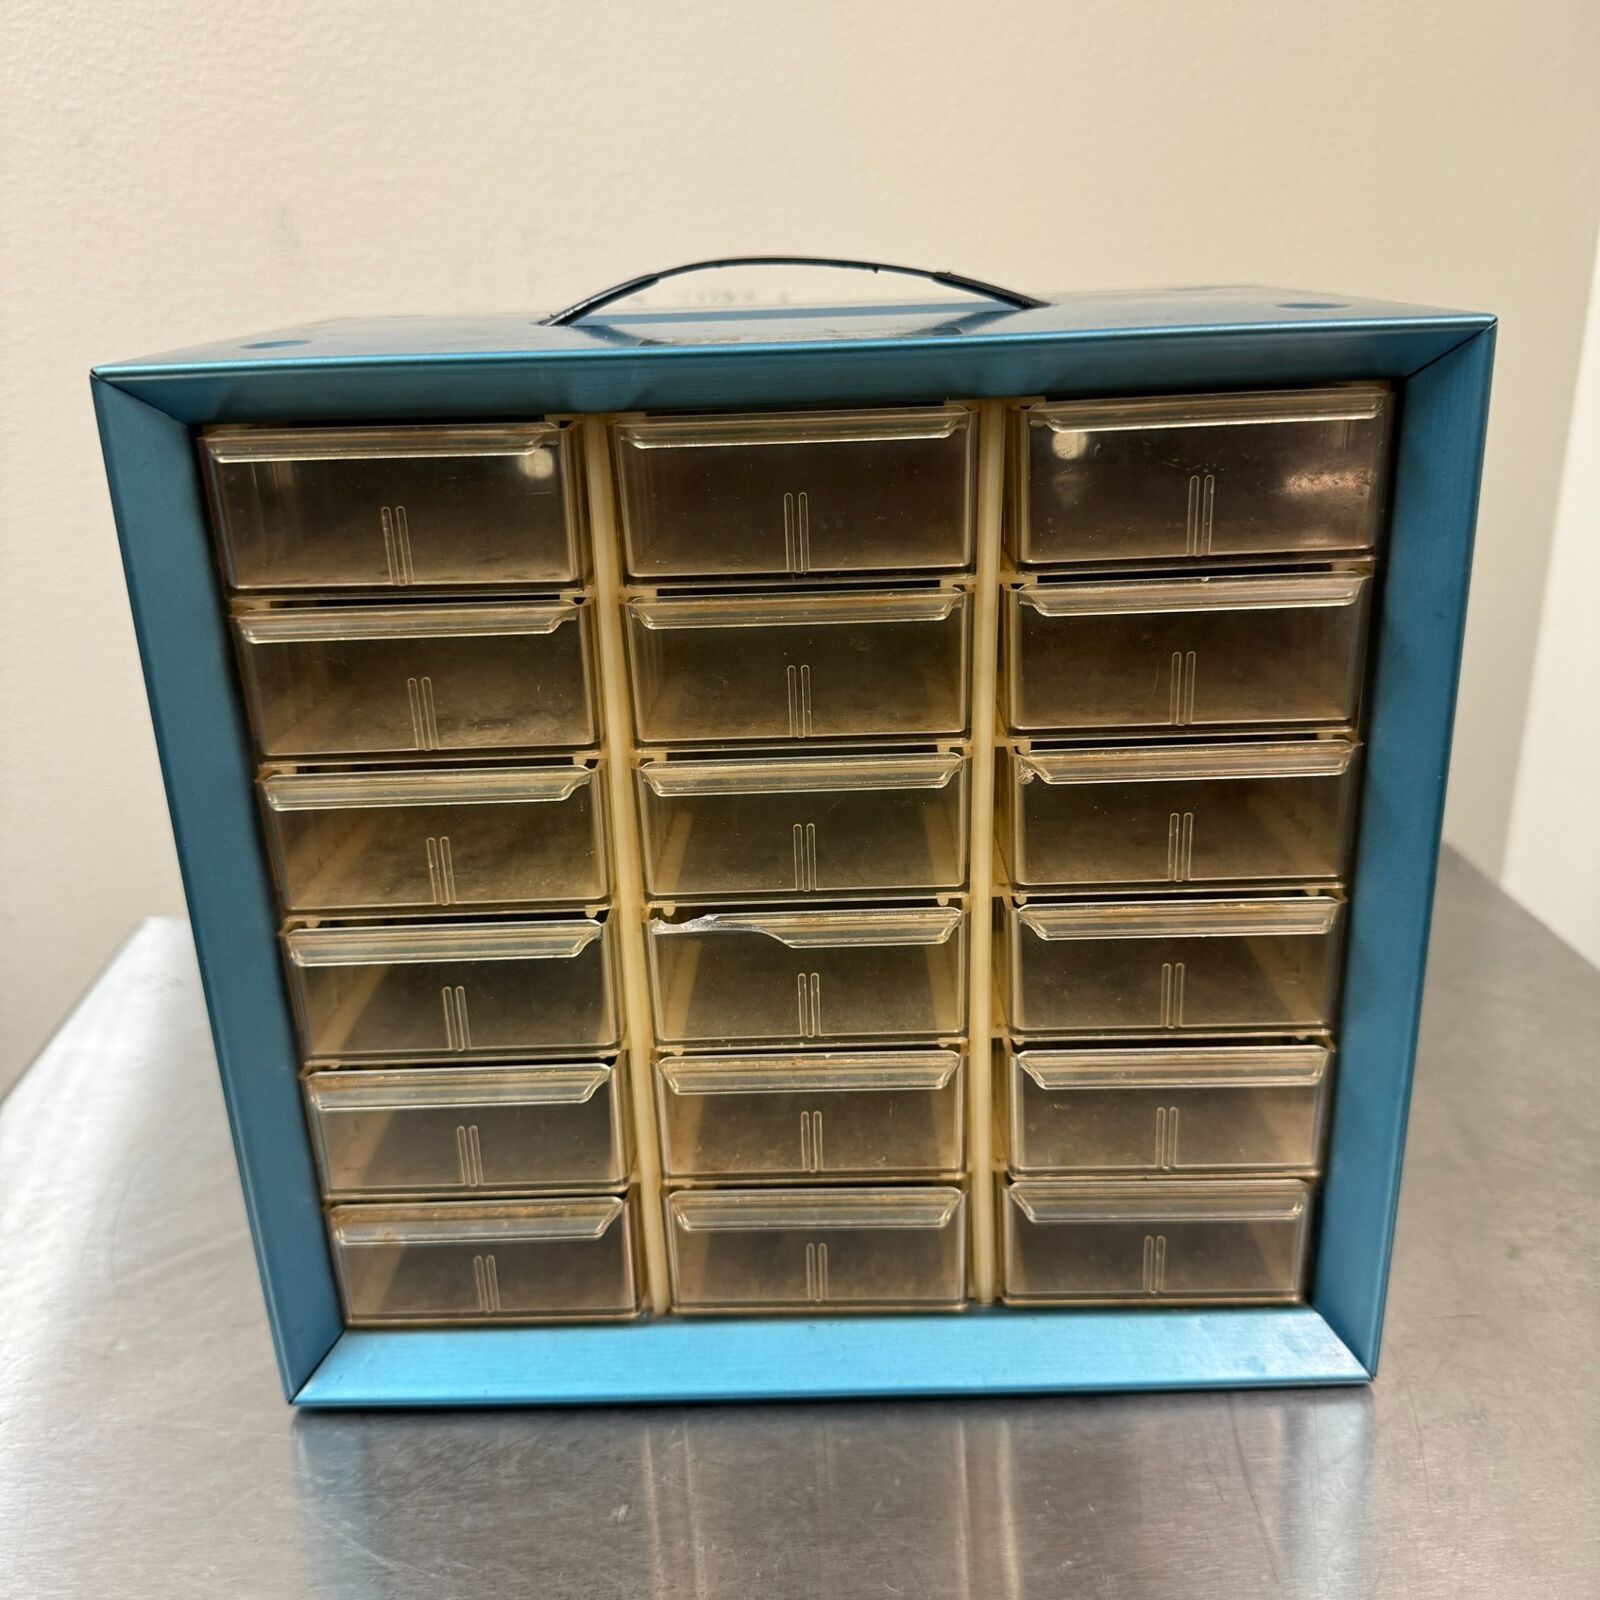 Vintage AKRO-MILS Blue Metal Small Parts Cabinet w/ 18 Drawers - Box